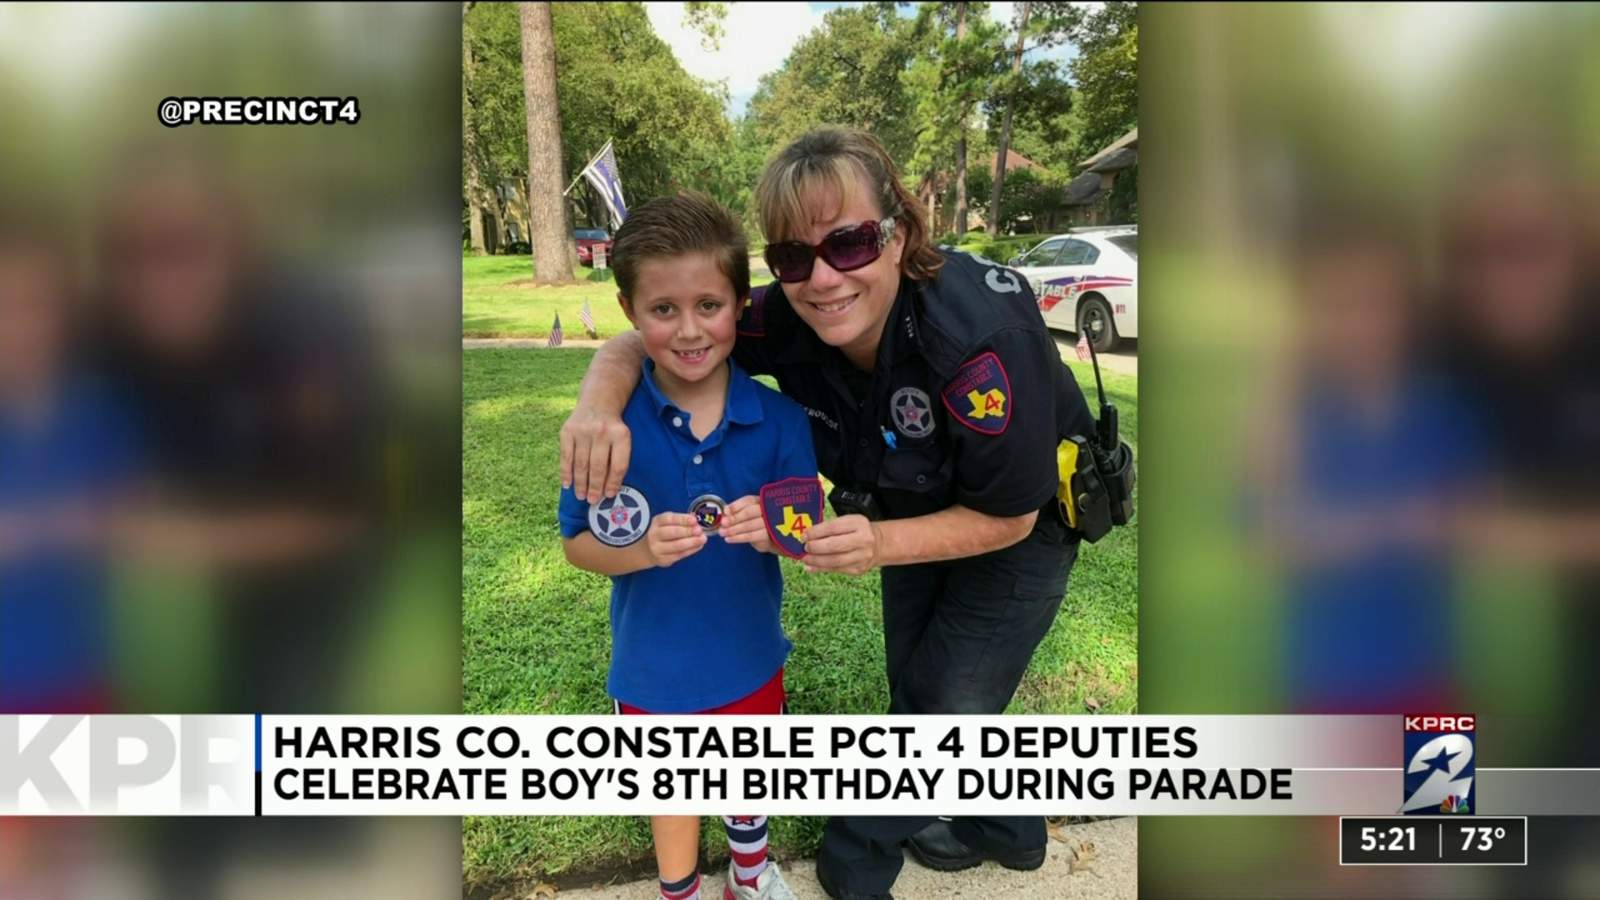 One Good Thing: Harris County Pct. 4 deputies celebrate boy’s 8th birthday during parade